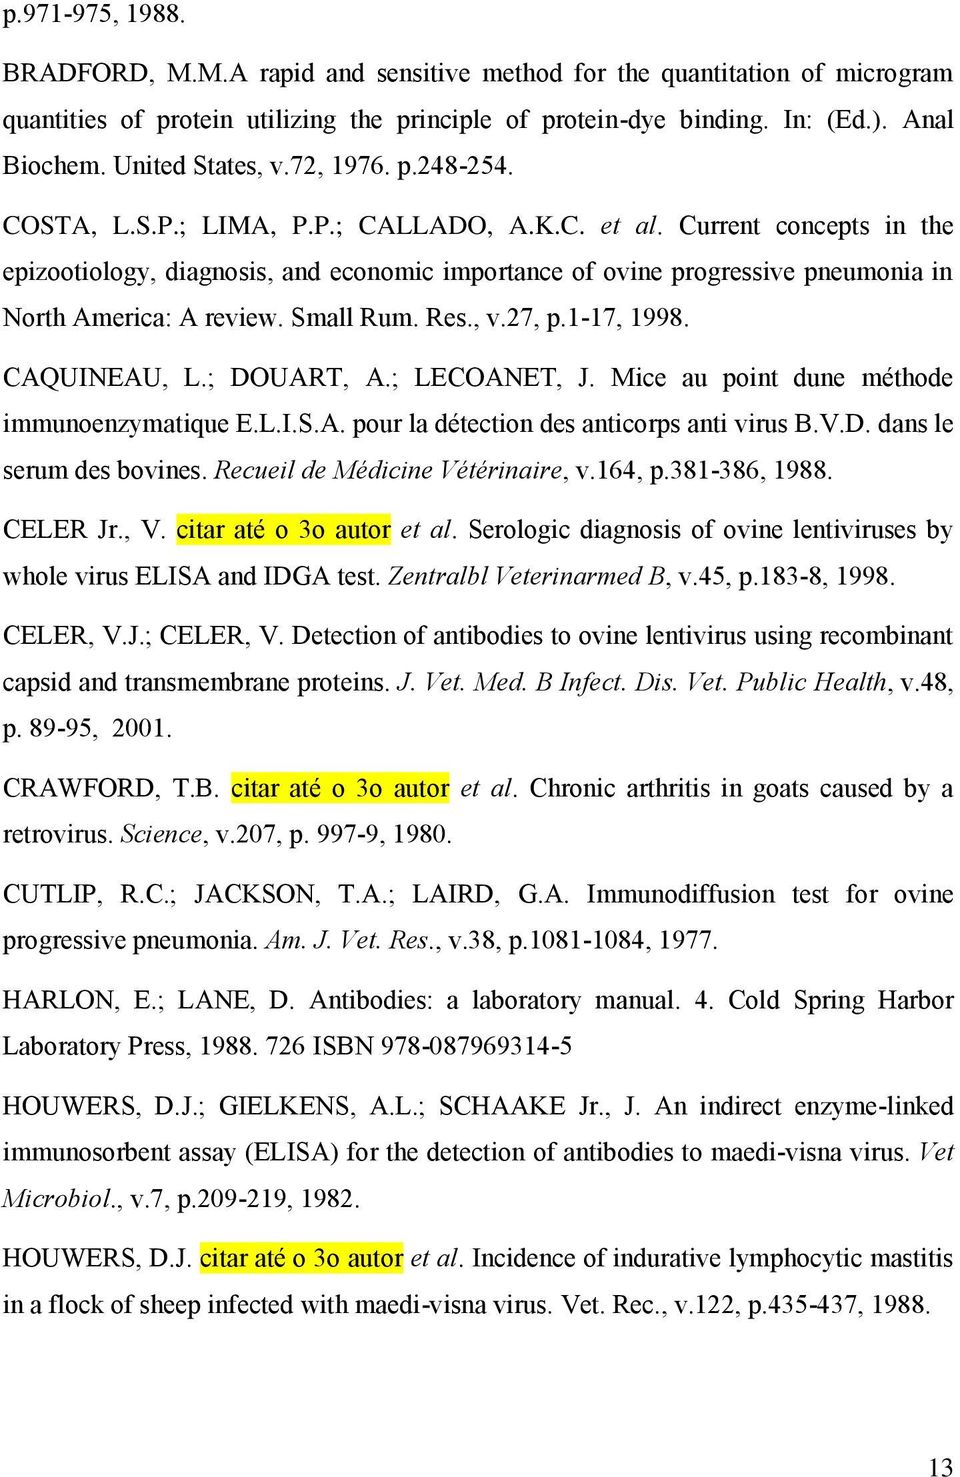 Current concepts in the epizootiology, diagnosis, and economic importance of ovine progressive pneumonia in North America: A review. Small Rum. Res., v.27, p.1-17, 1998. CAQUINEAU, L.; DOUART, A.